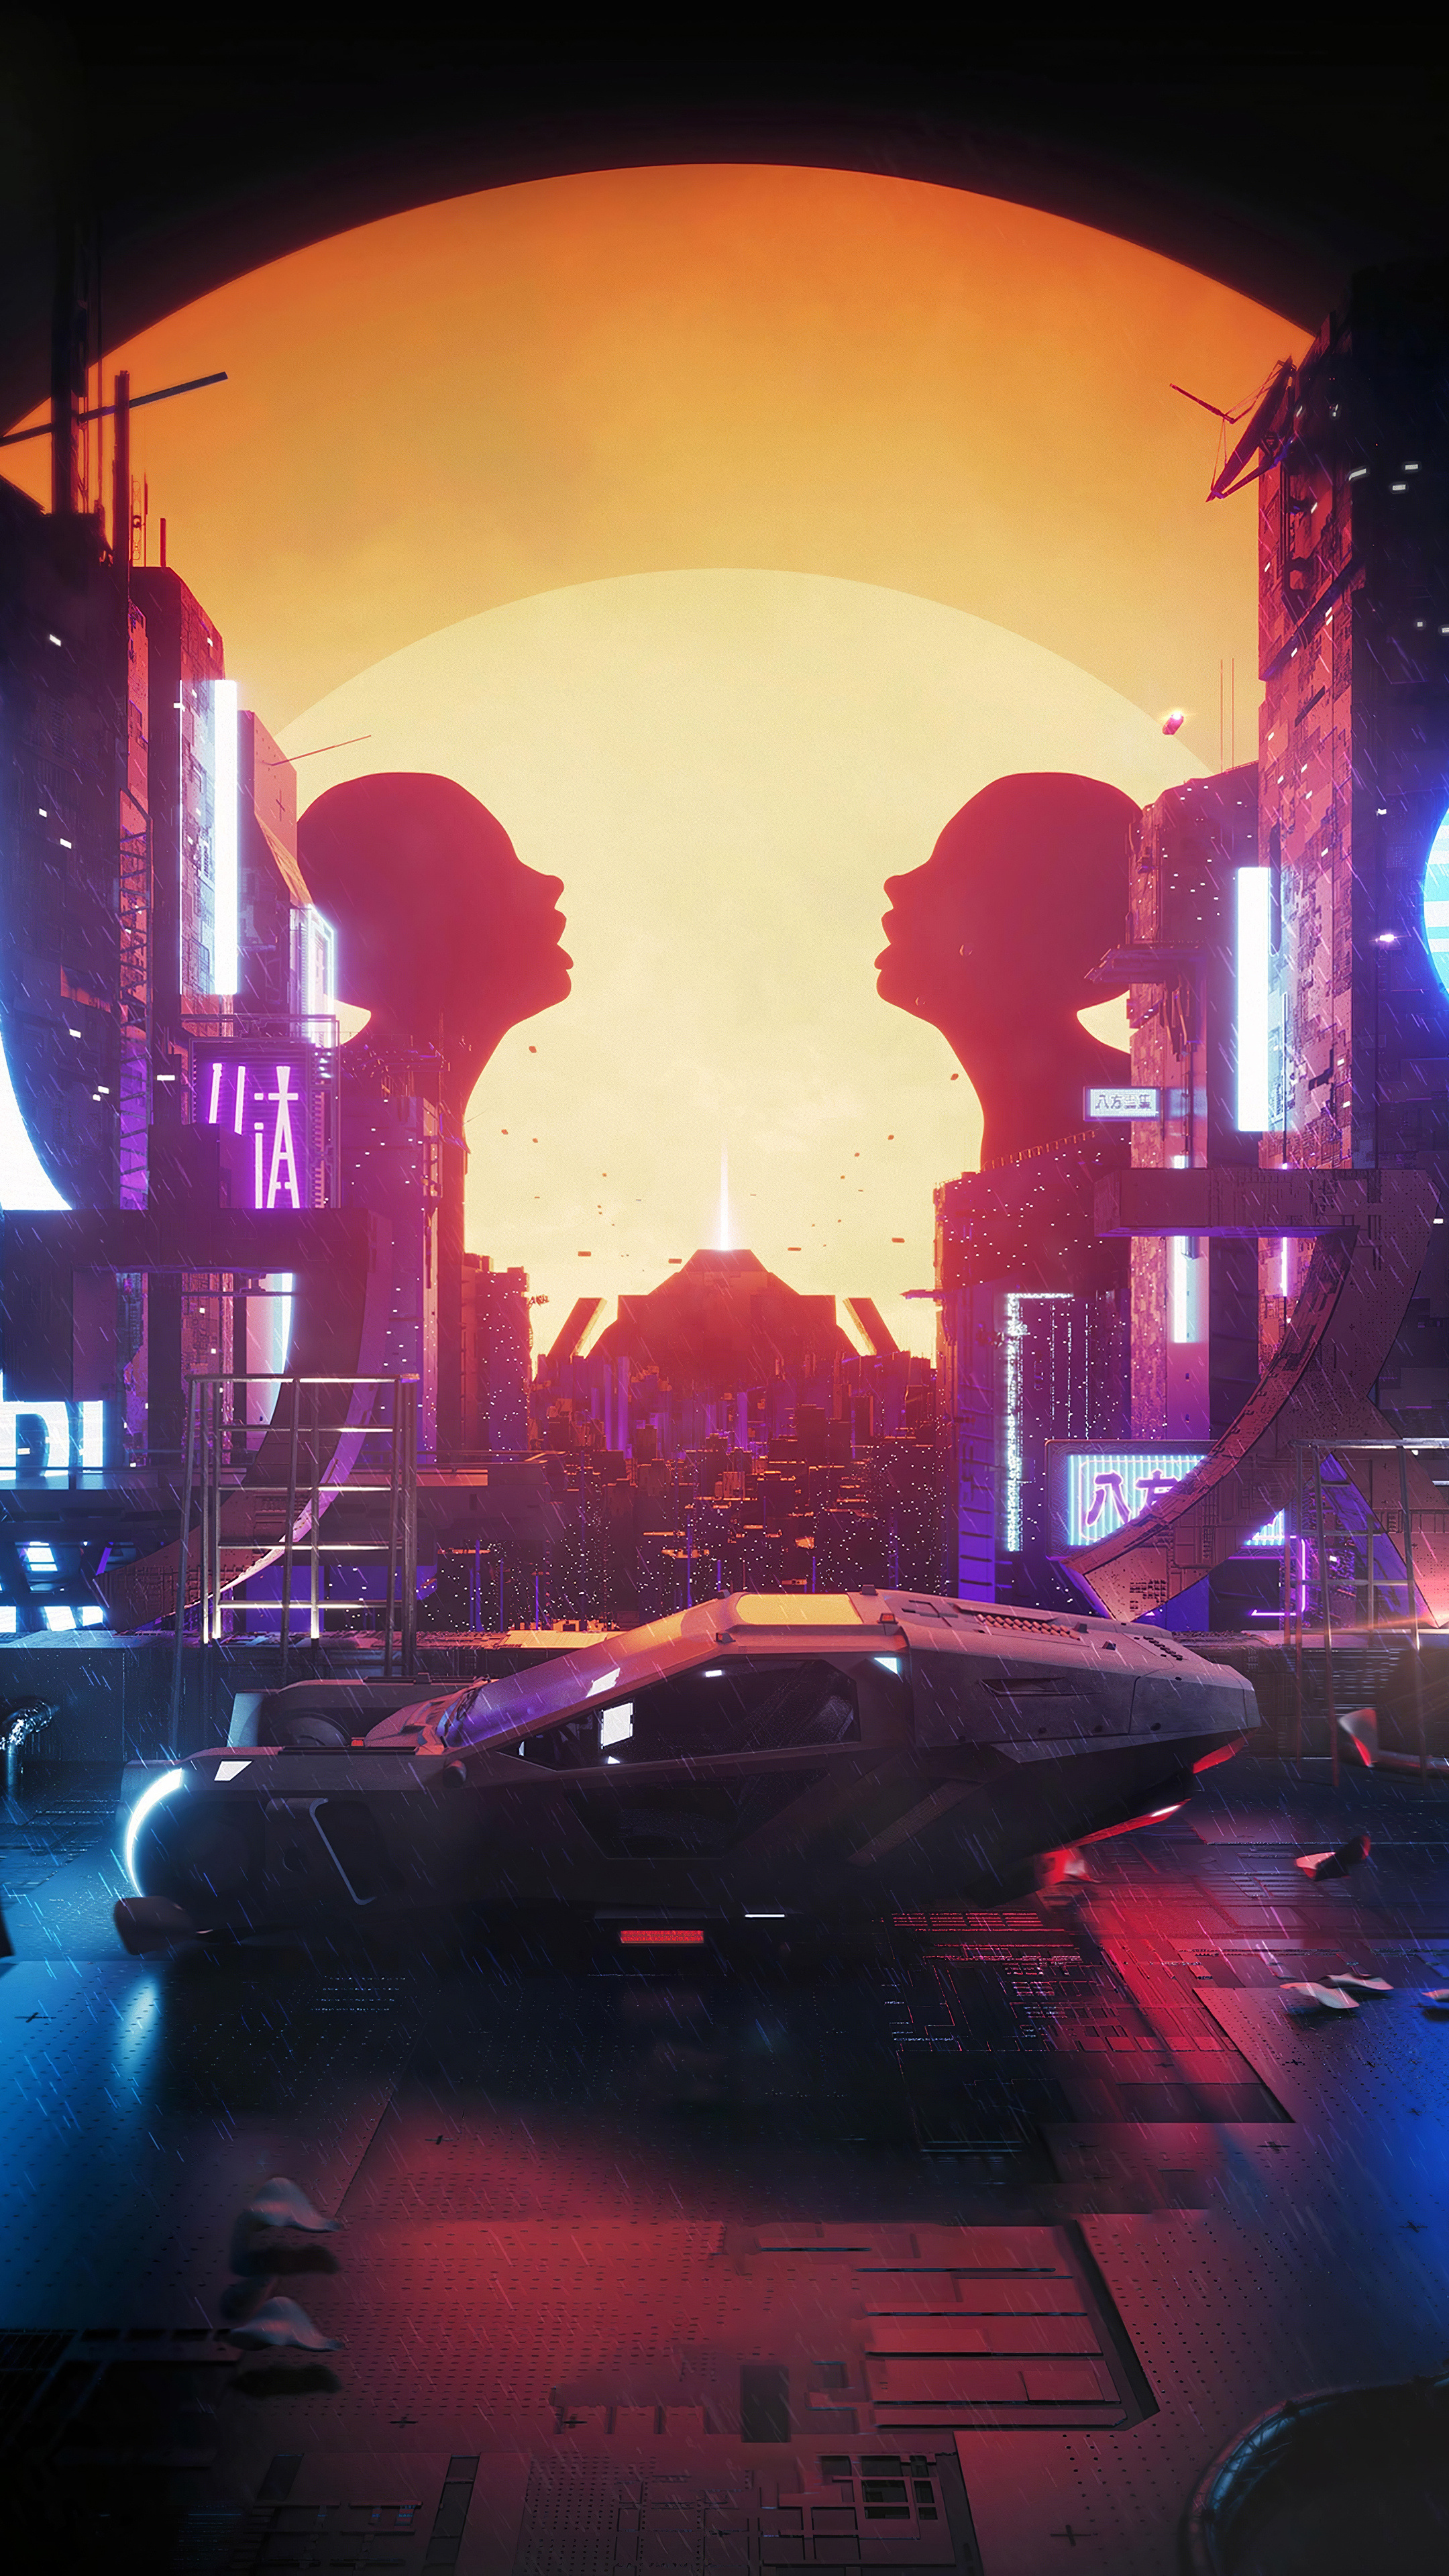 Blade Runner 2049 sci-fi car, 4K Sony Xperia wallpapers, HD images, 2160x3840 4K Handy